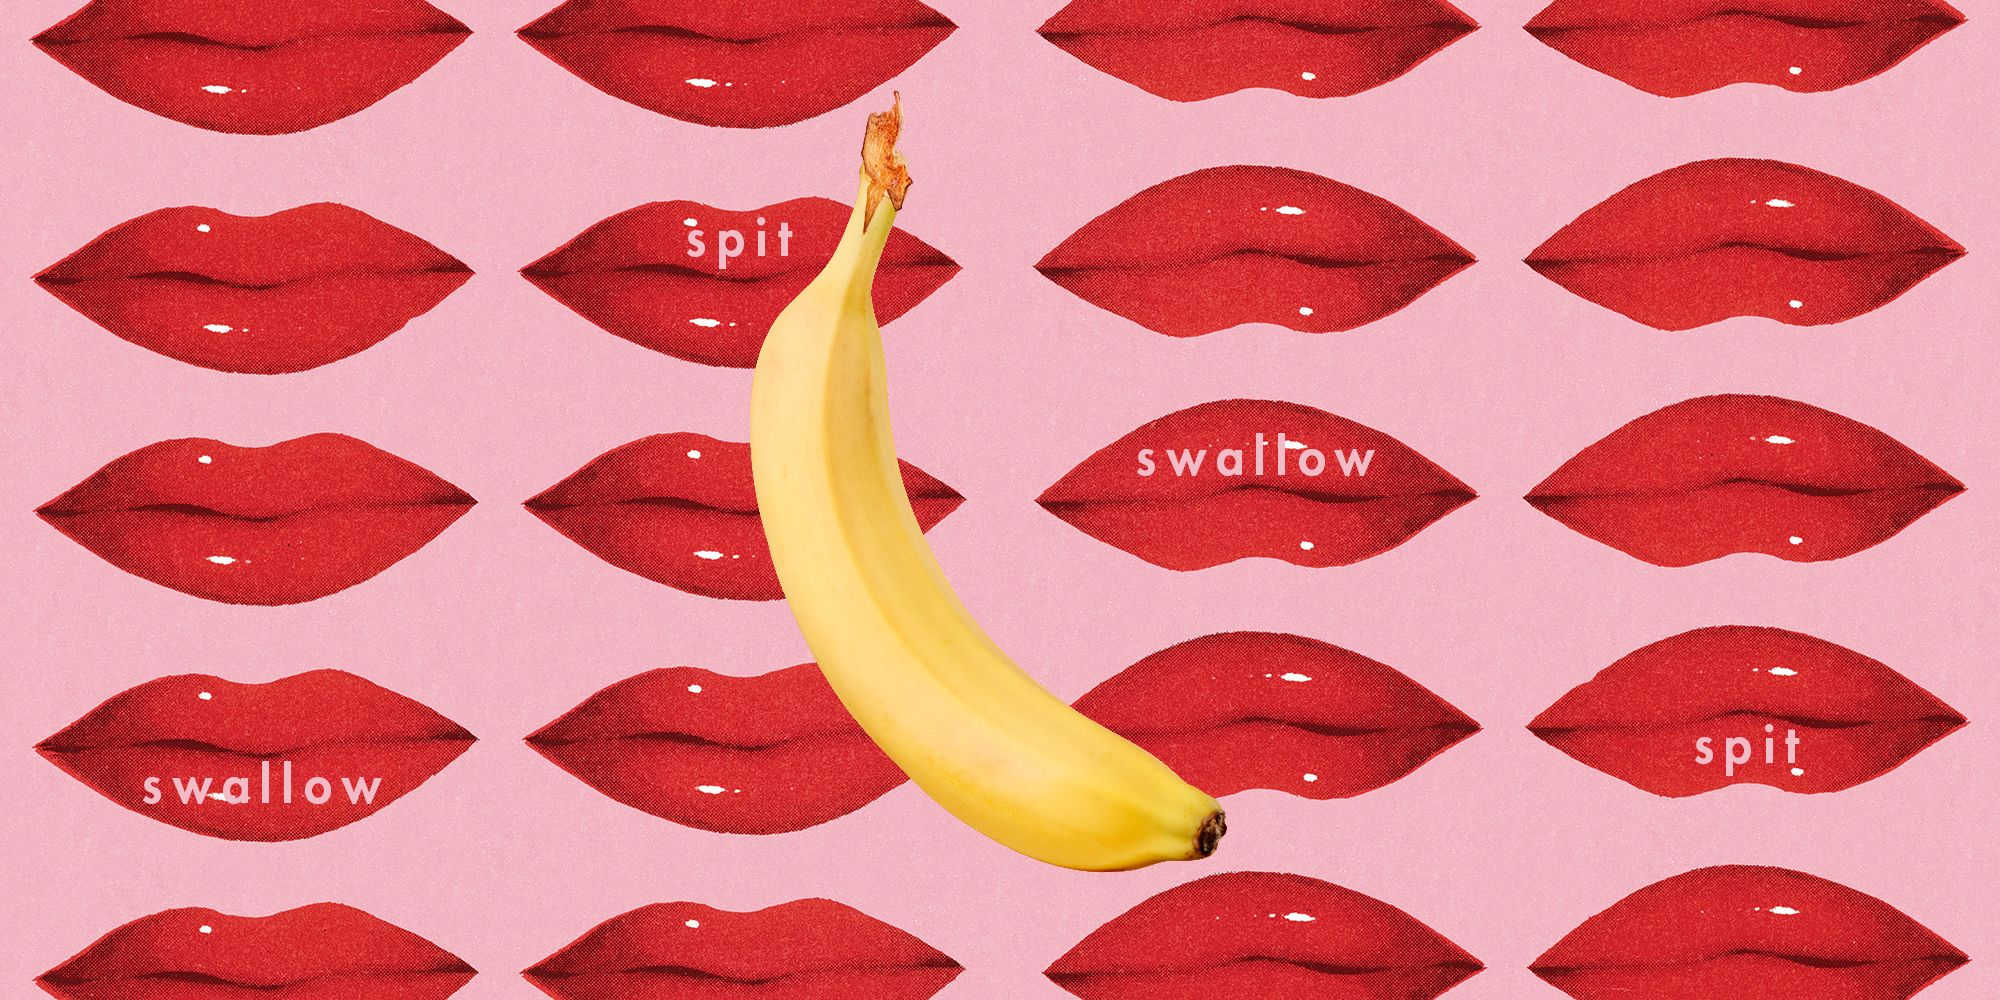 Spit or Swallow pic